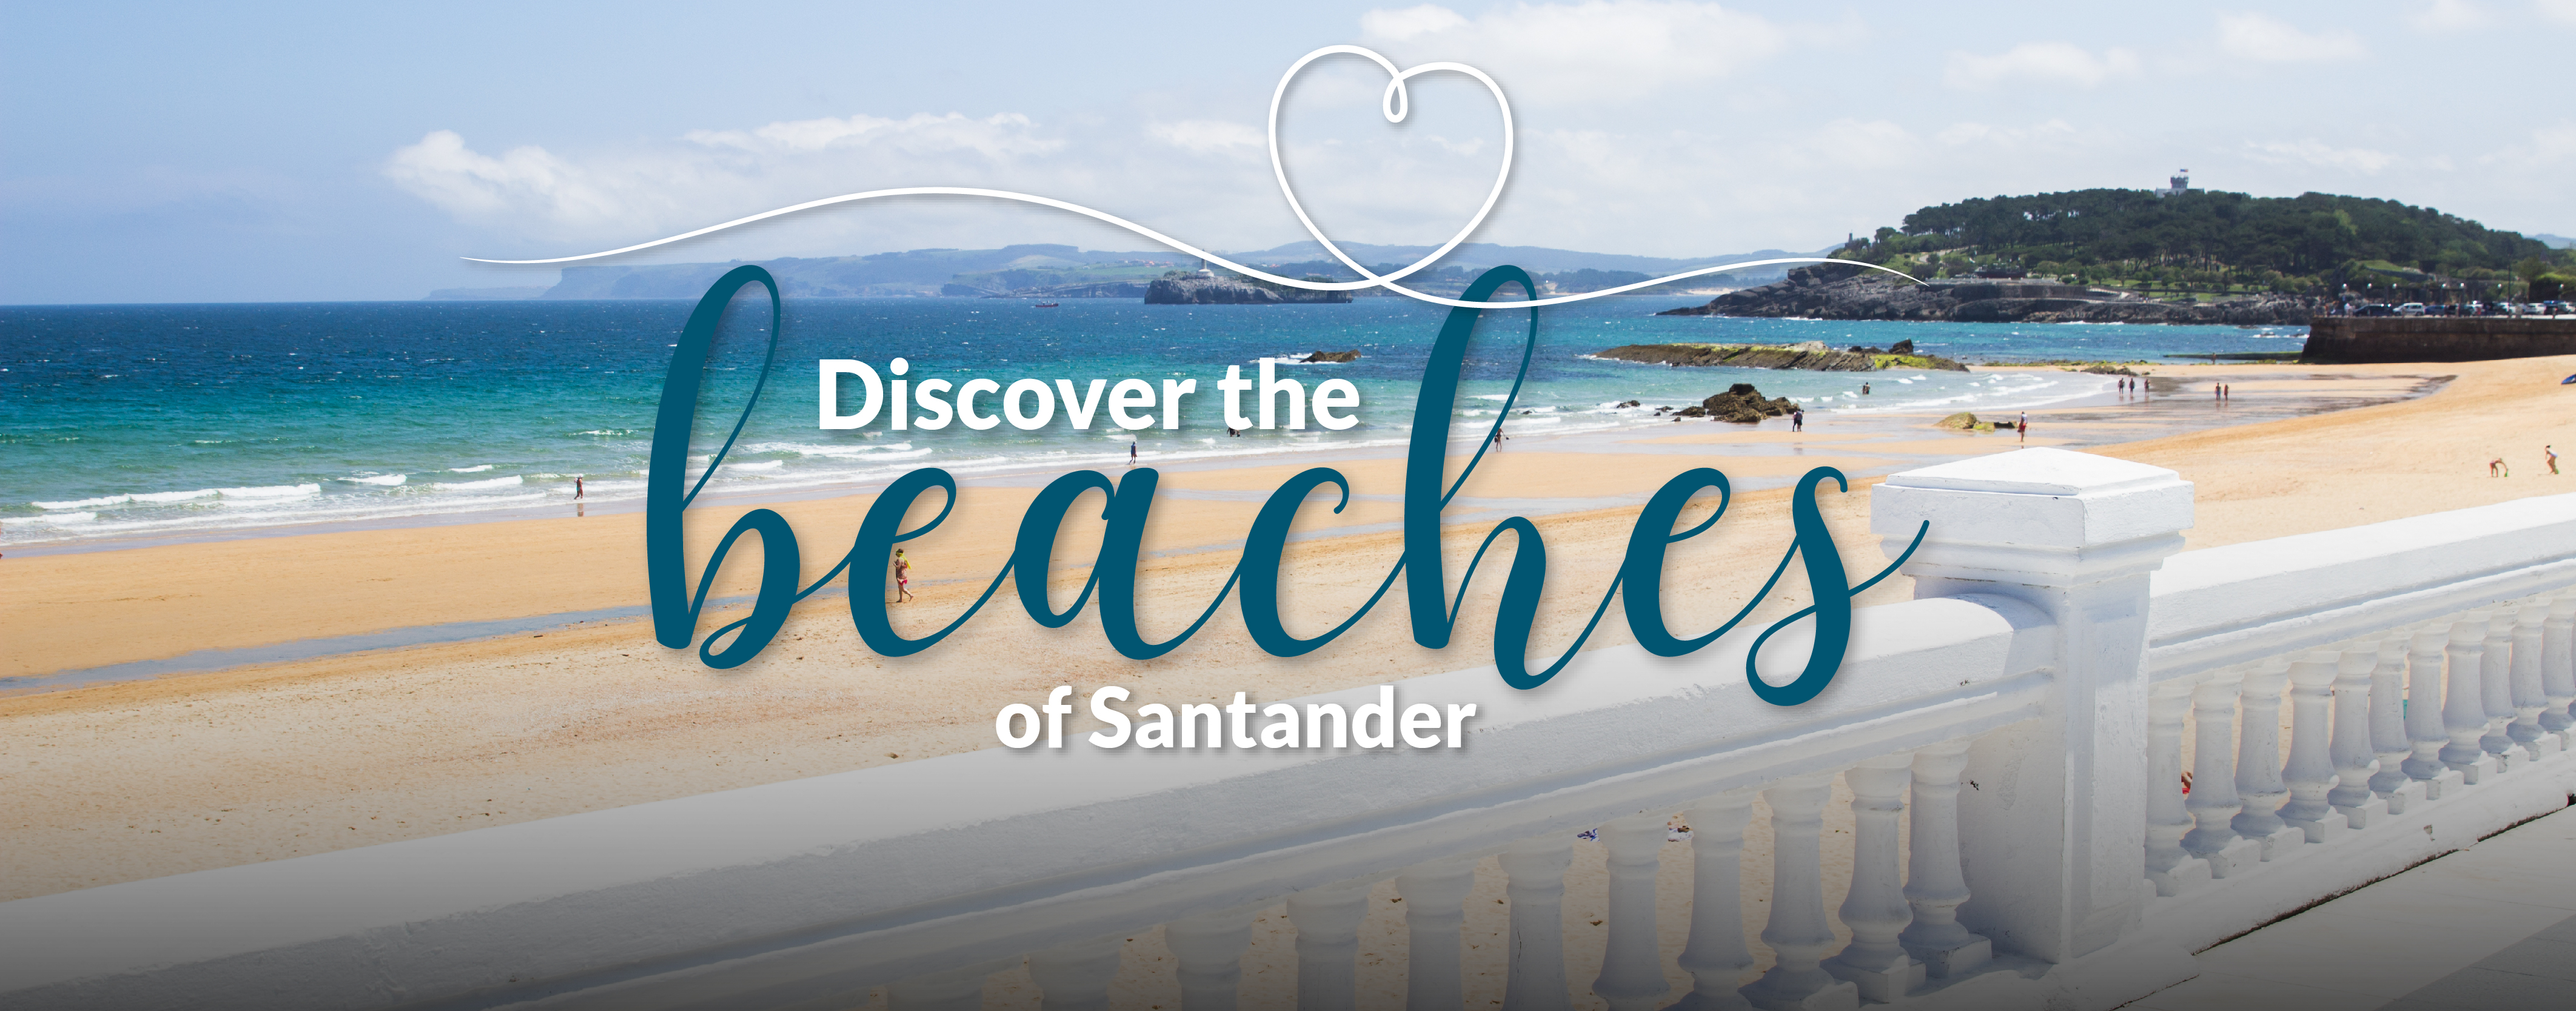 Discover the beaches